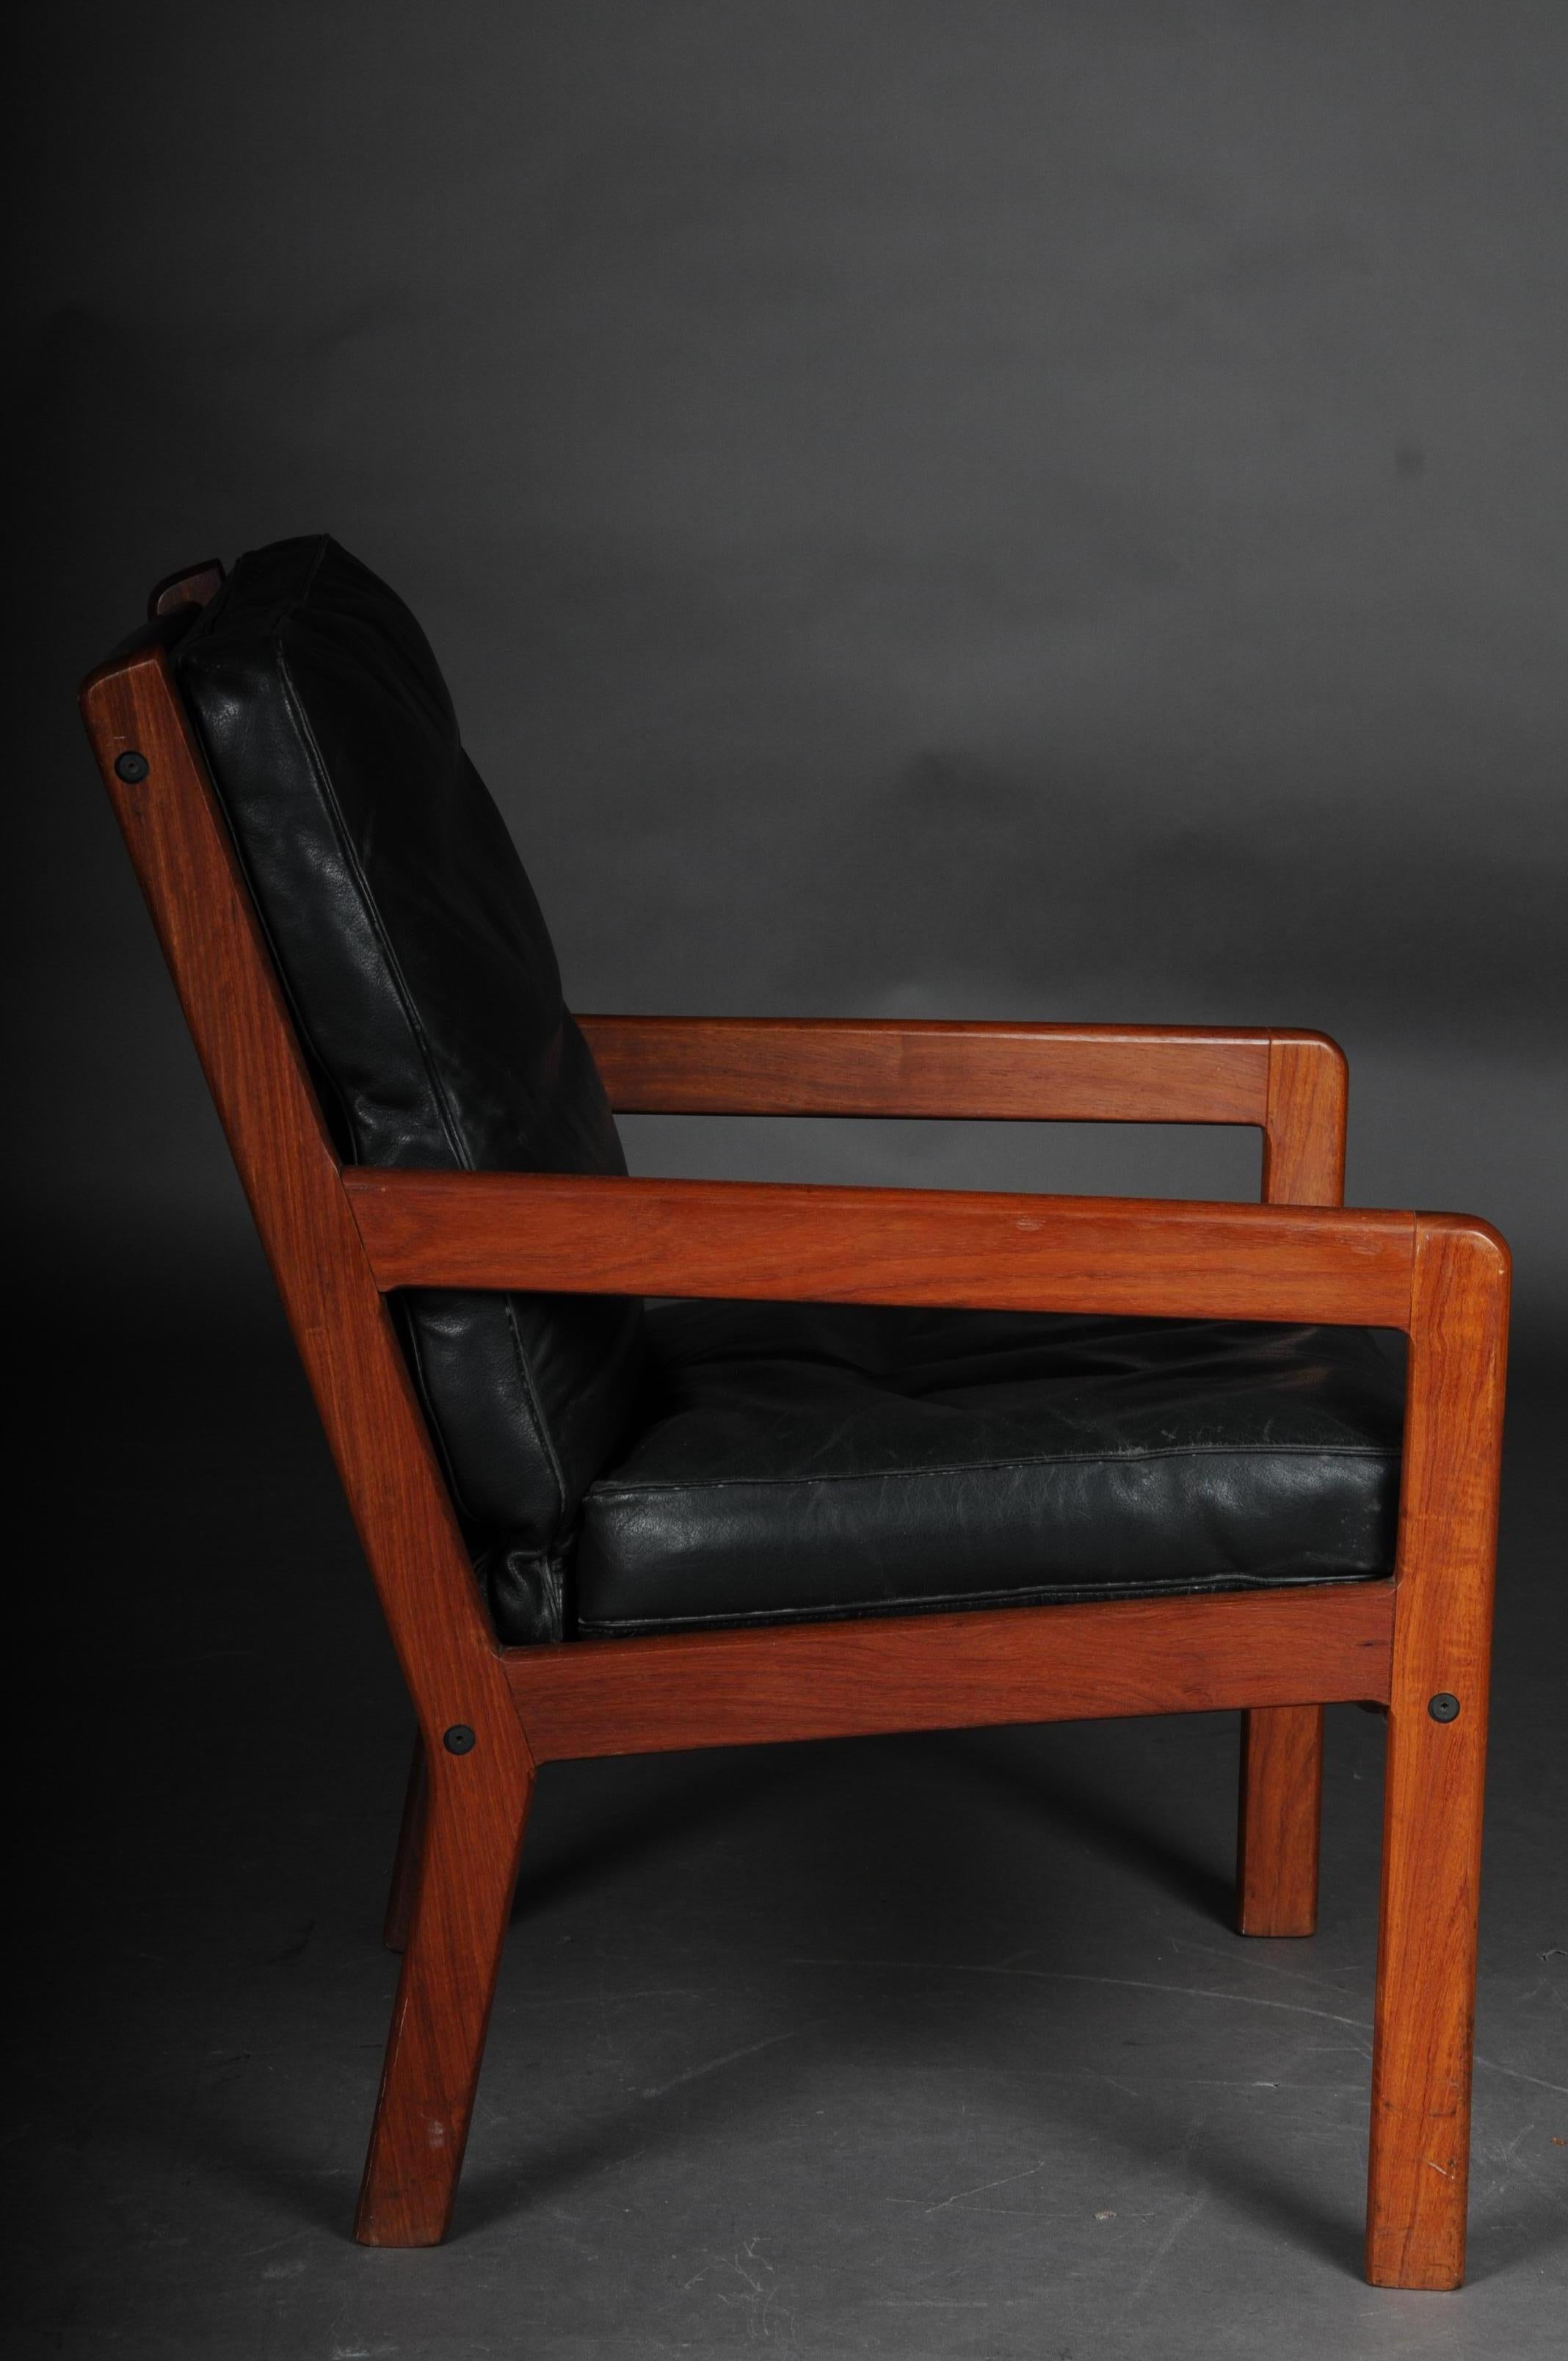 Leather Pair of Vintage Teak Armchairs, Chairs, 1960s-1970s, Danish For Sale